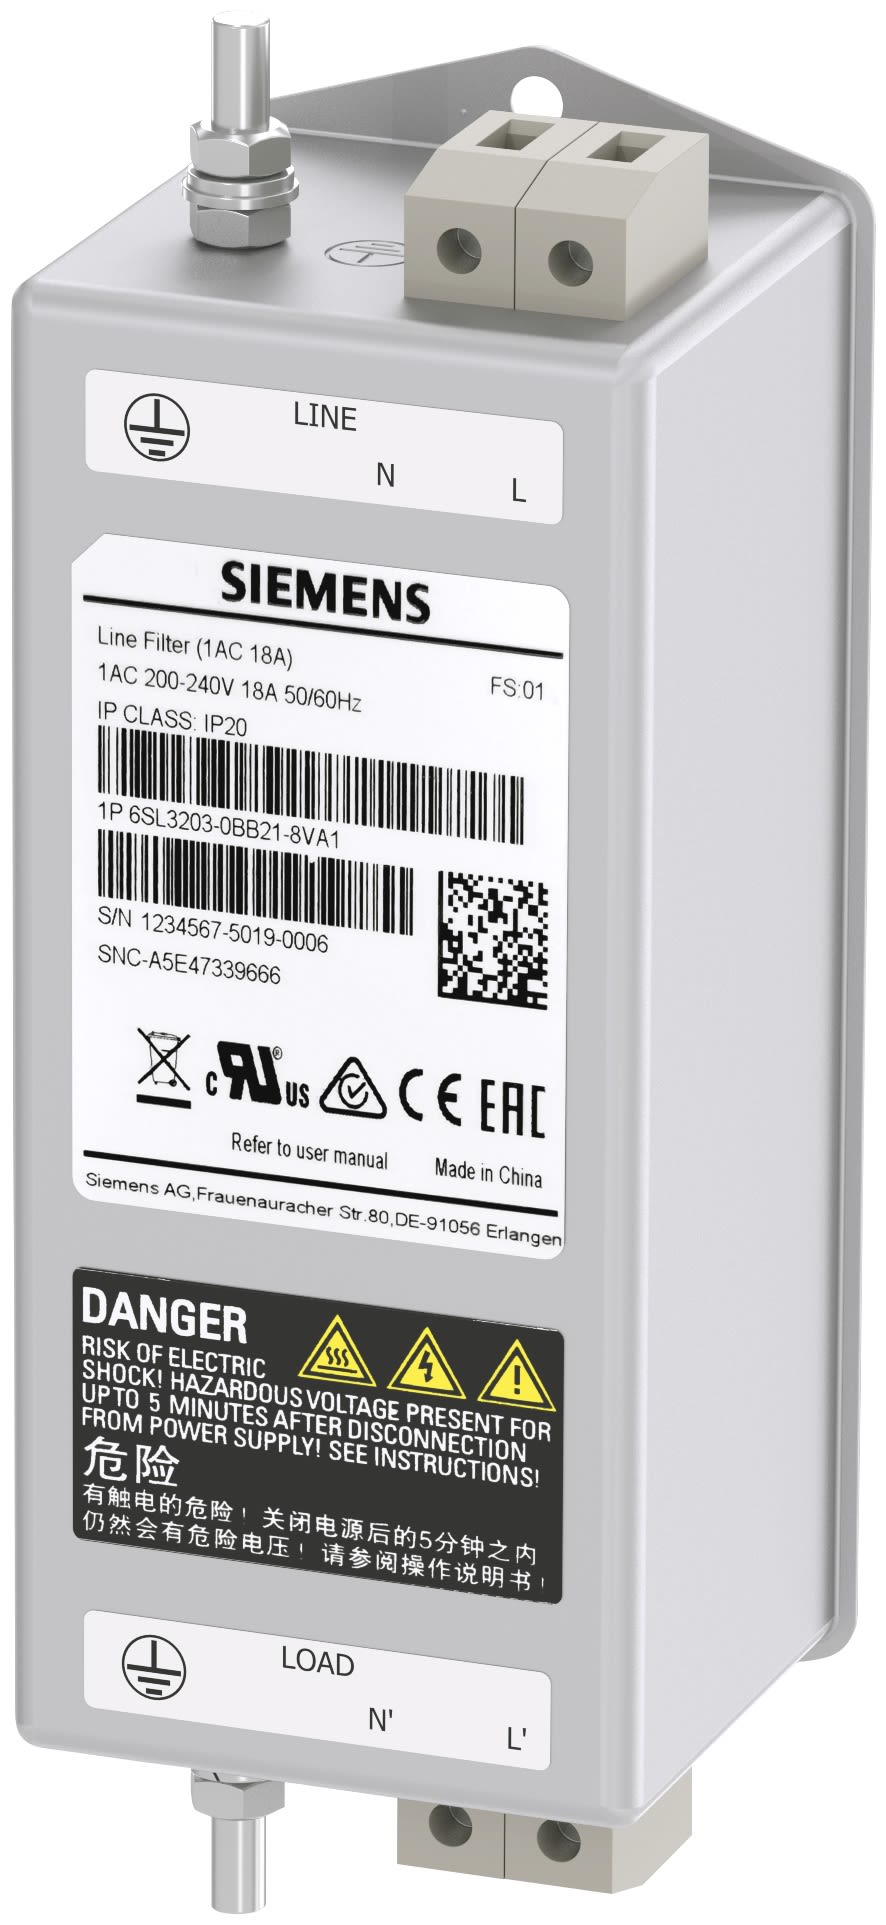 Siemens, SINAMICS 18A 240 V ac Category 2, Panel Mount Power Line Filter, Single Phase